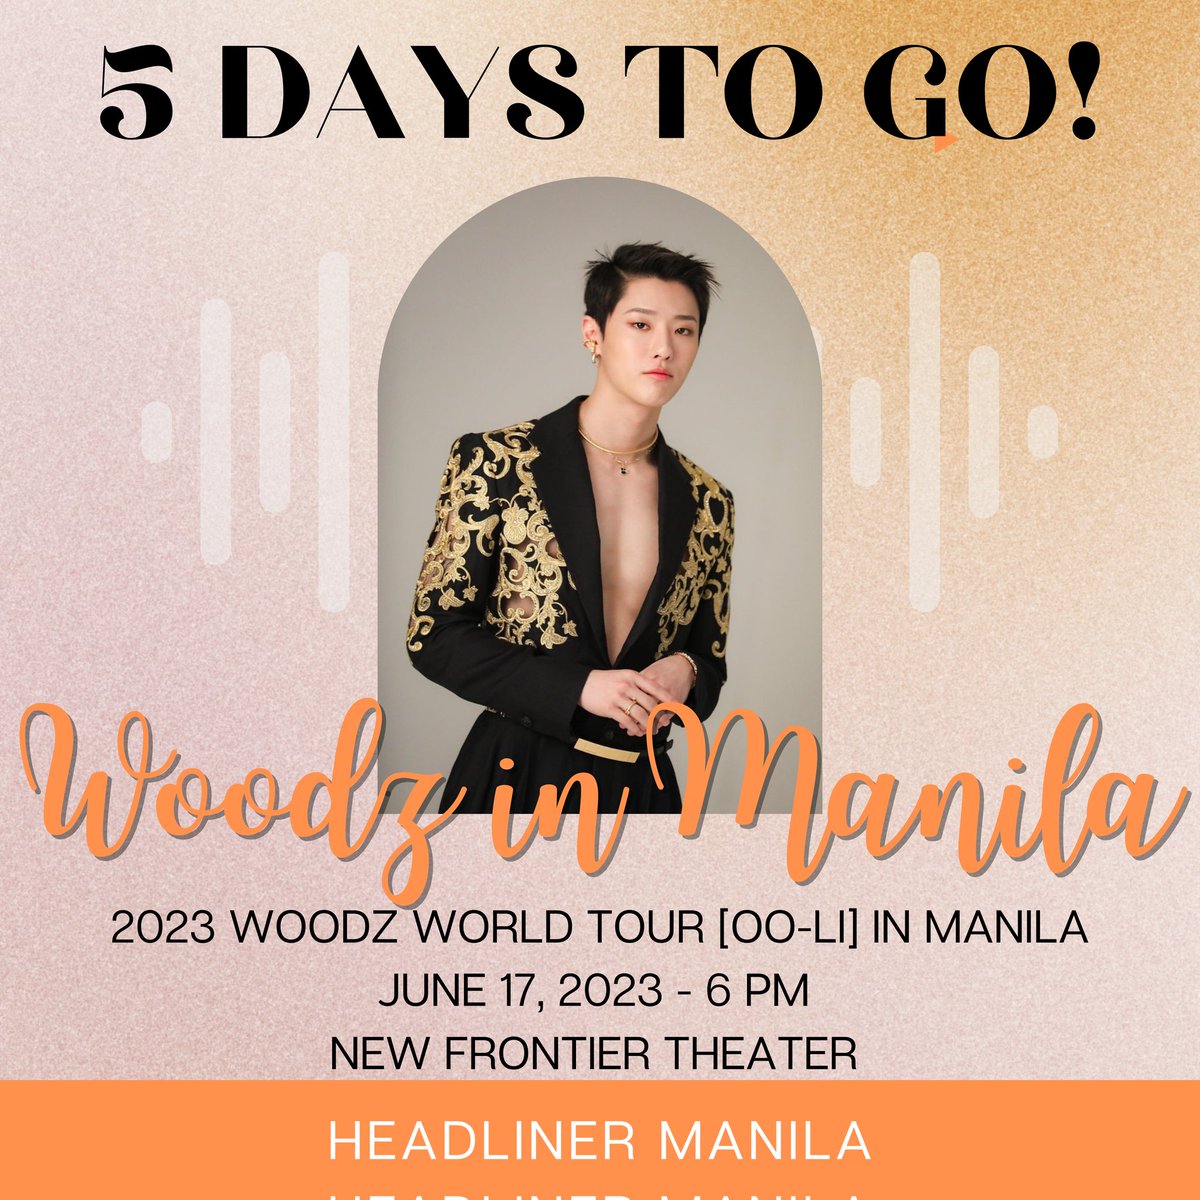 🪵 #WOODZ father owned a restaurant here in the Philippines. ☺️

What is your favorite WOODZ song?🤔

WOODZ in Manila tickets are still available via TicketNet ☺️

Event by: @pulpliveworld 
---
#WOODZinMNL #WOODZ_WORLD_TOUR